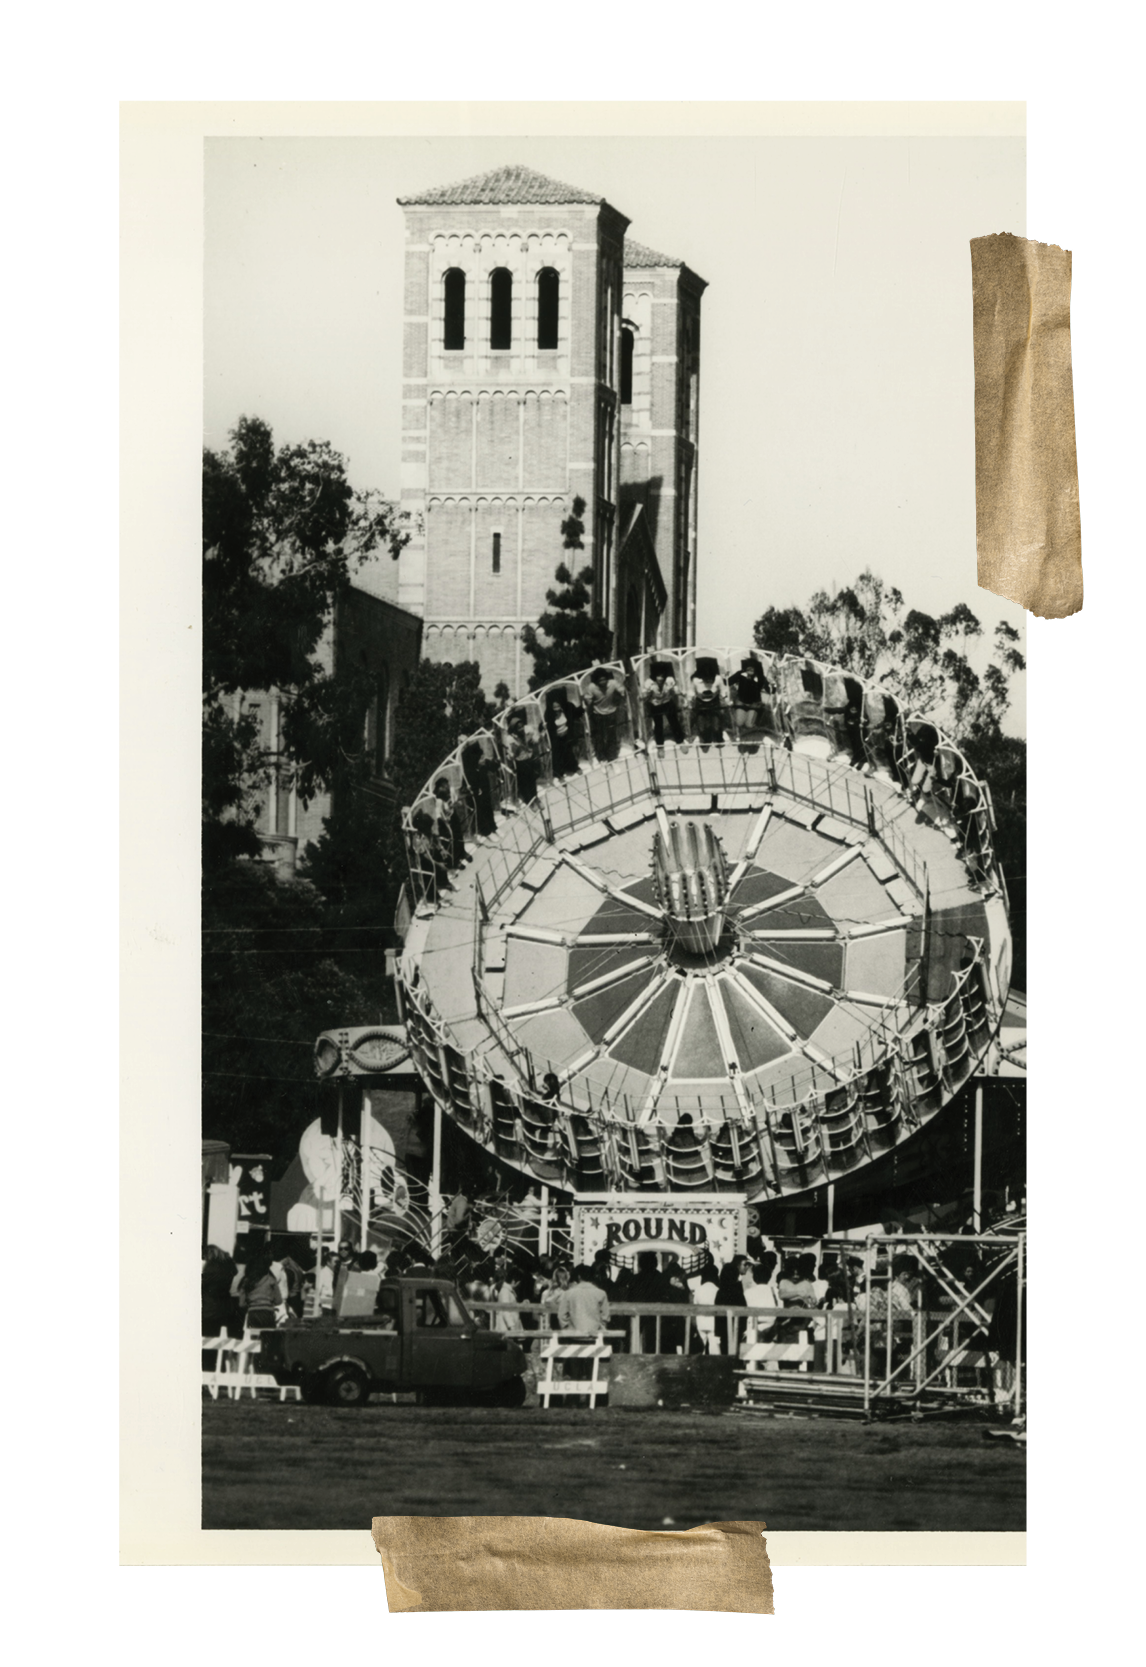 A black and white photograph of a carnival ride on UCLA's campus. Date unknown.